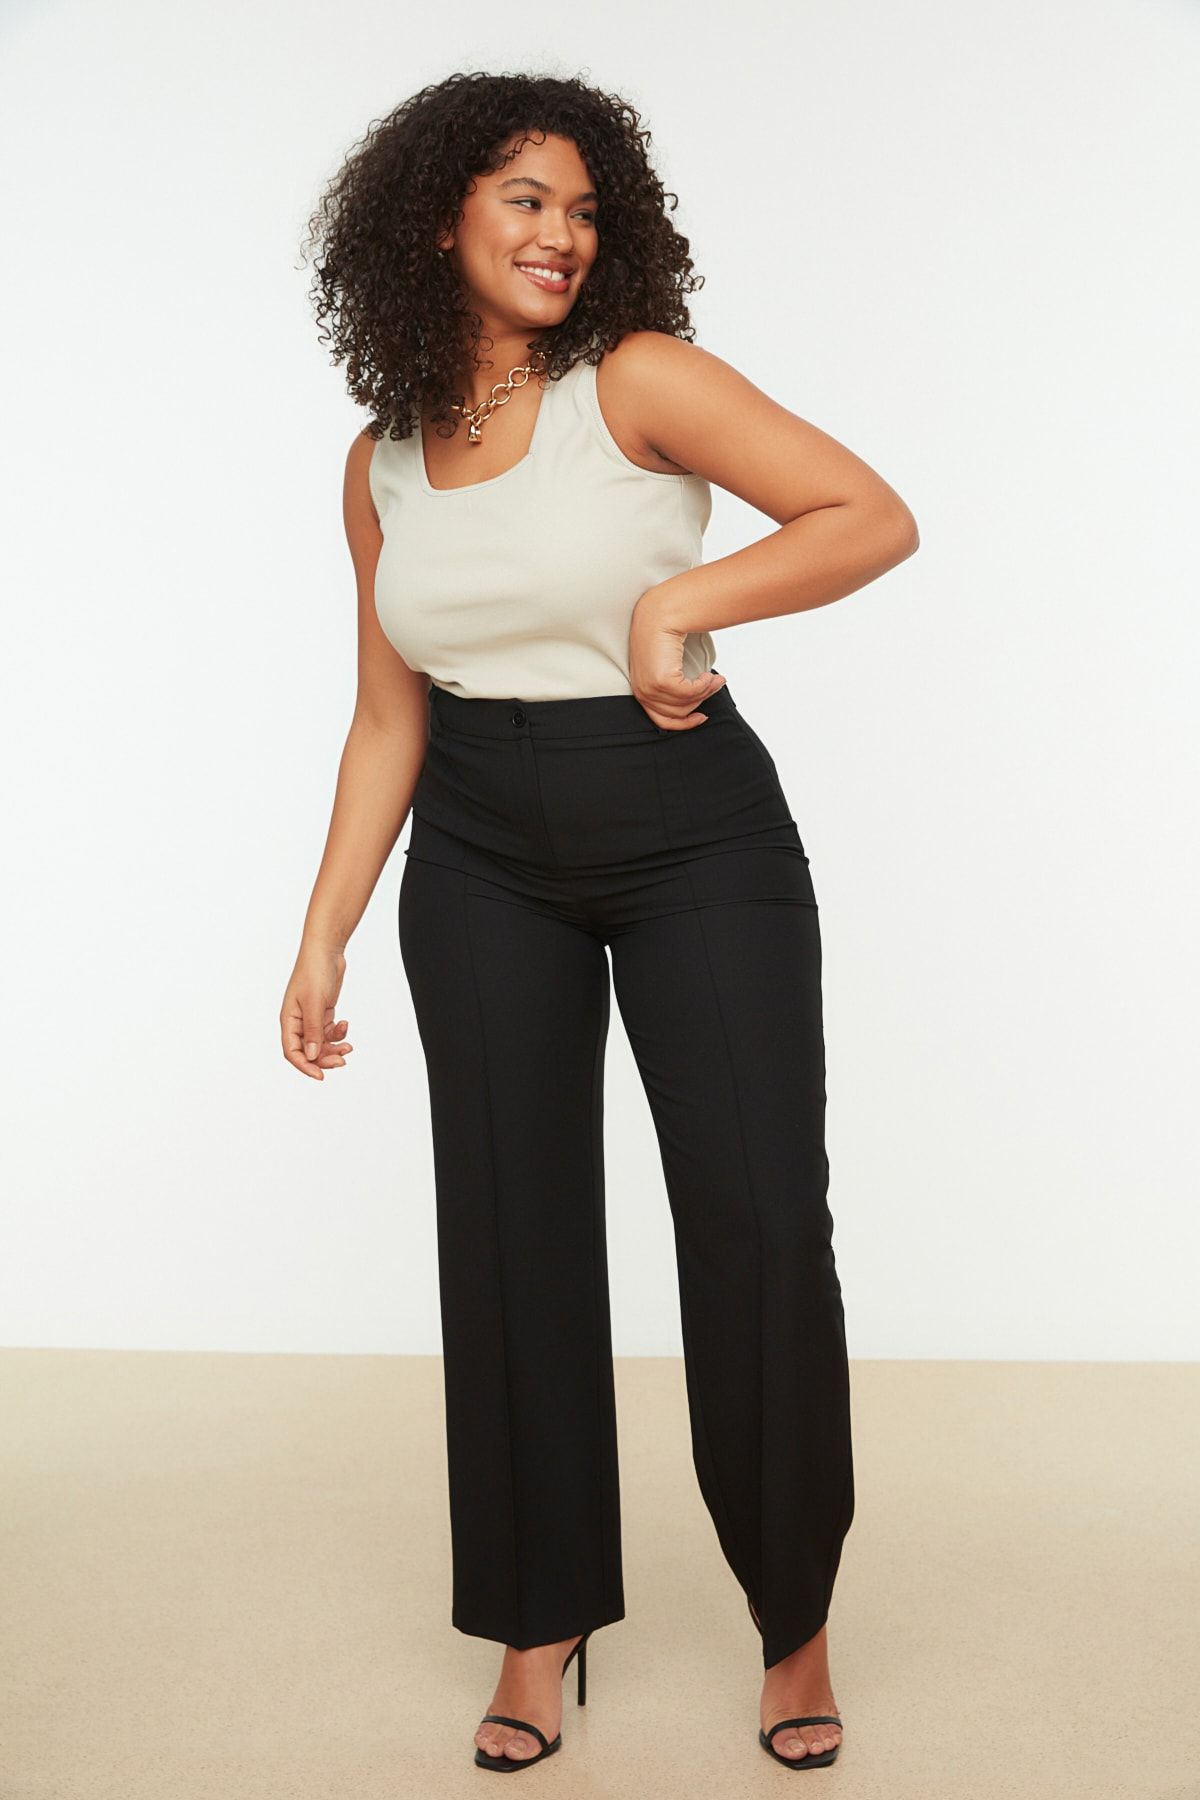 Women's Plus Size Pants  Fashion-Forward and Flattering Fits